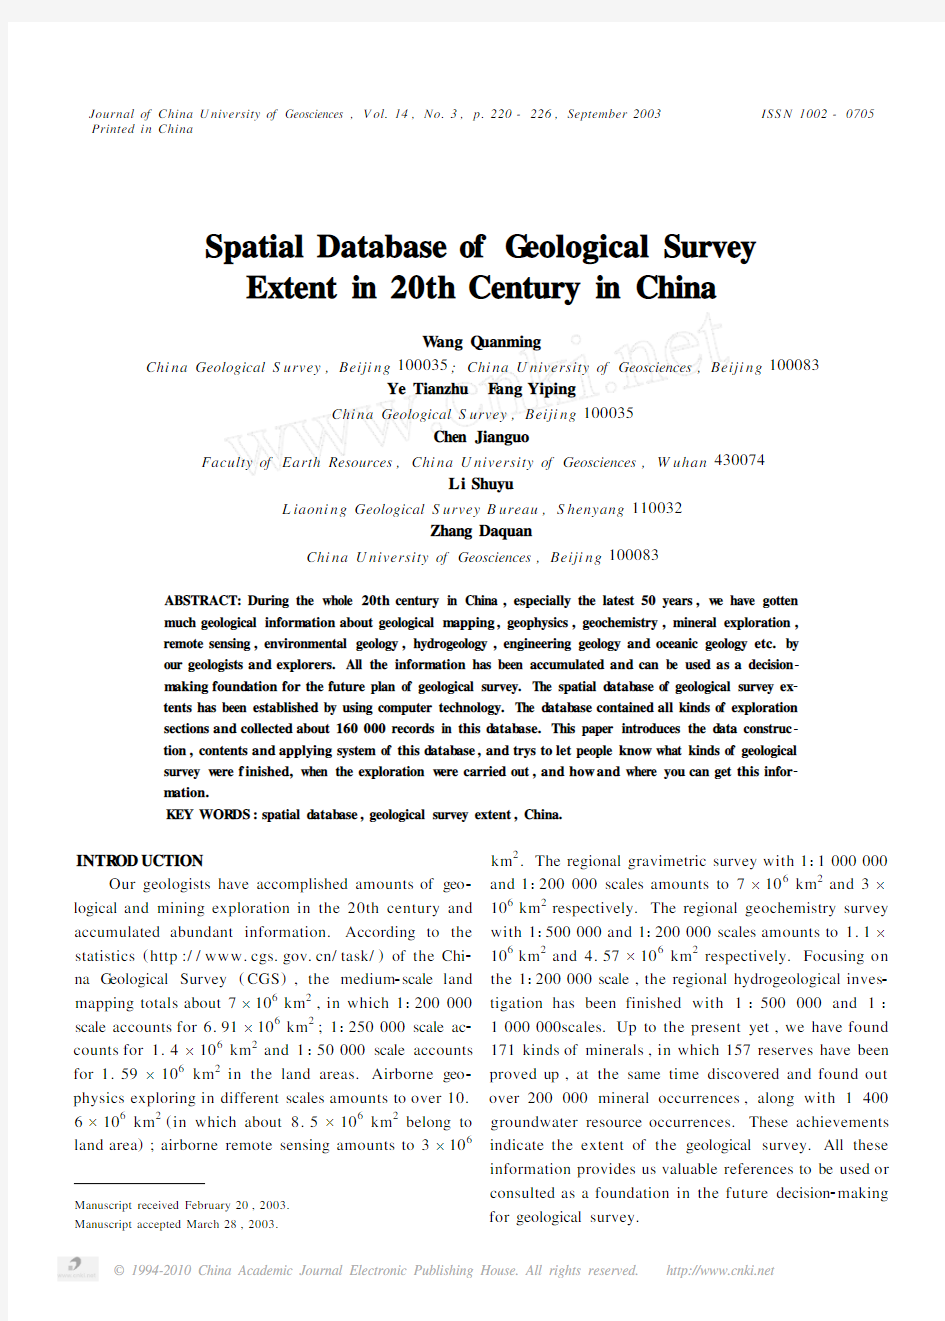 Spatial Database of Geological Survey Extent in 20th Century in China